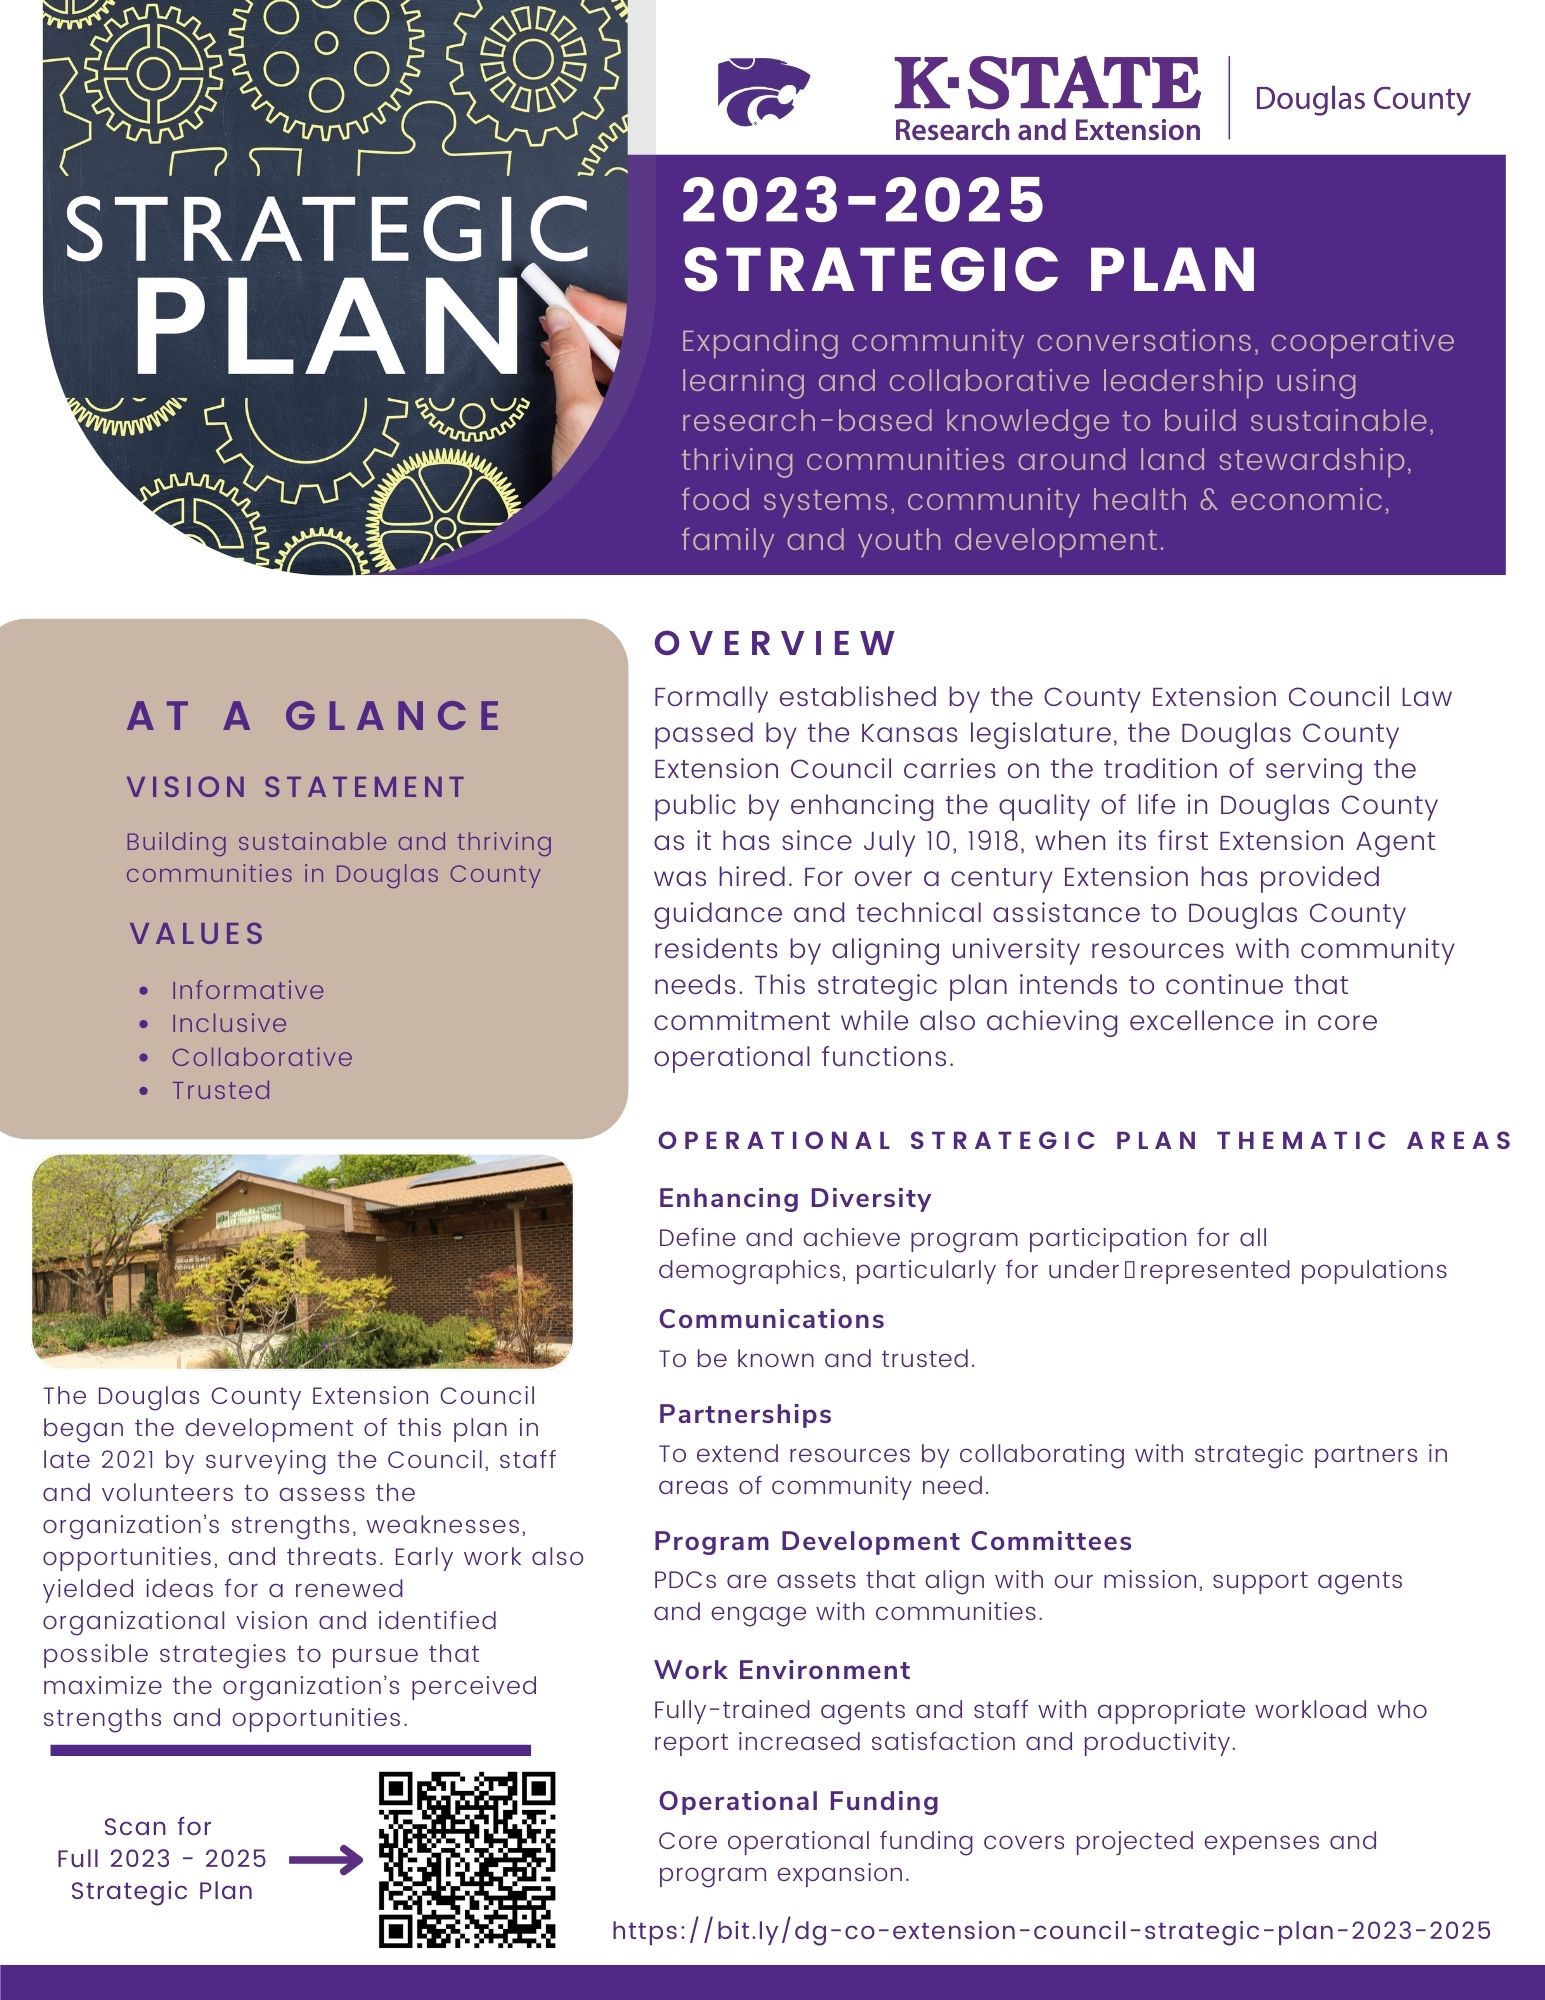 2023-2025 Strategic Plan for Douglas County Extension link